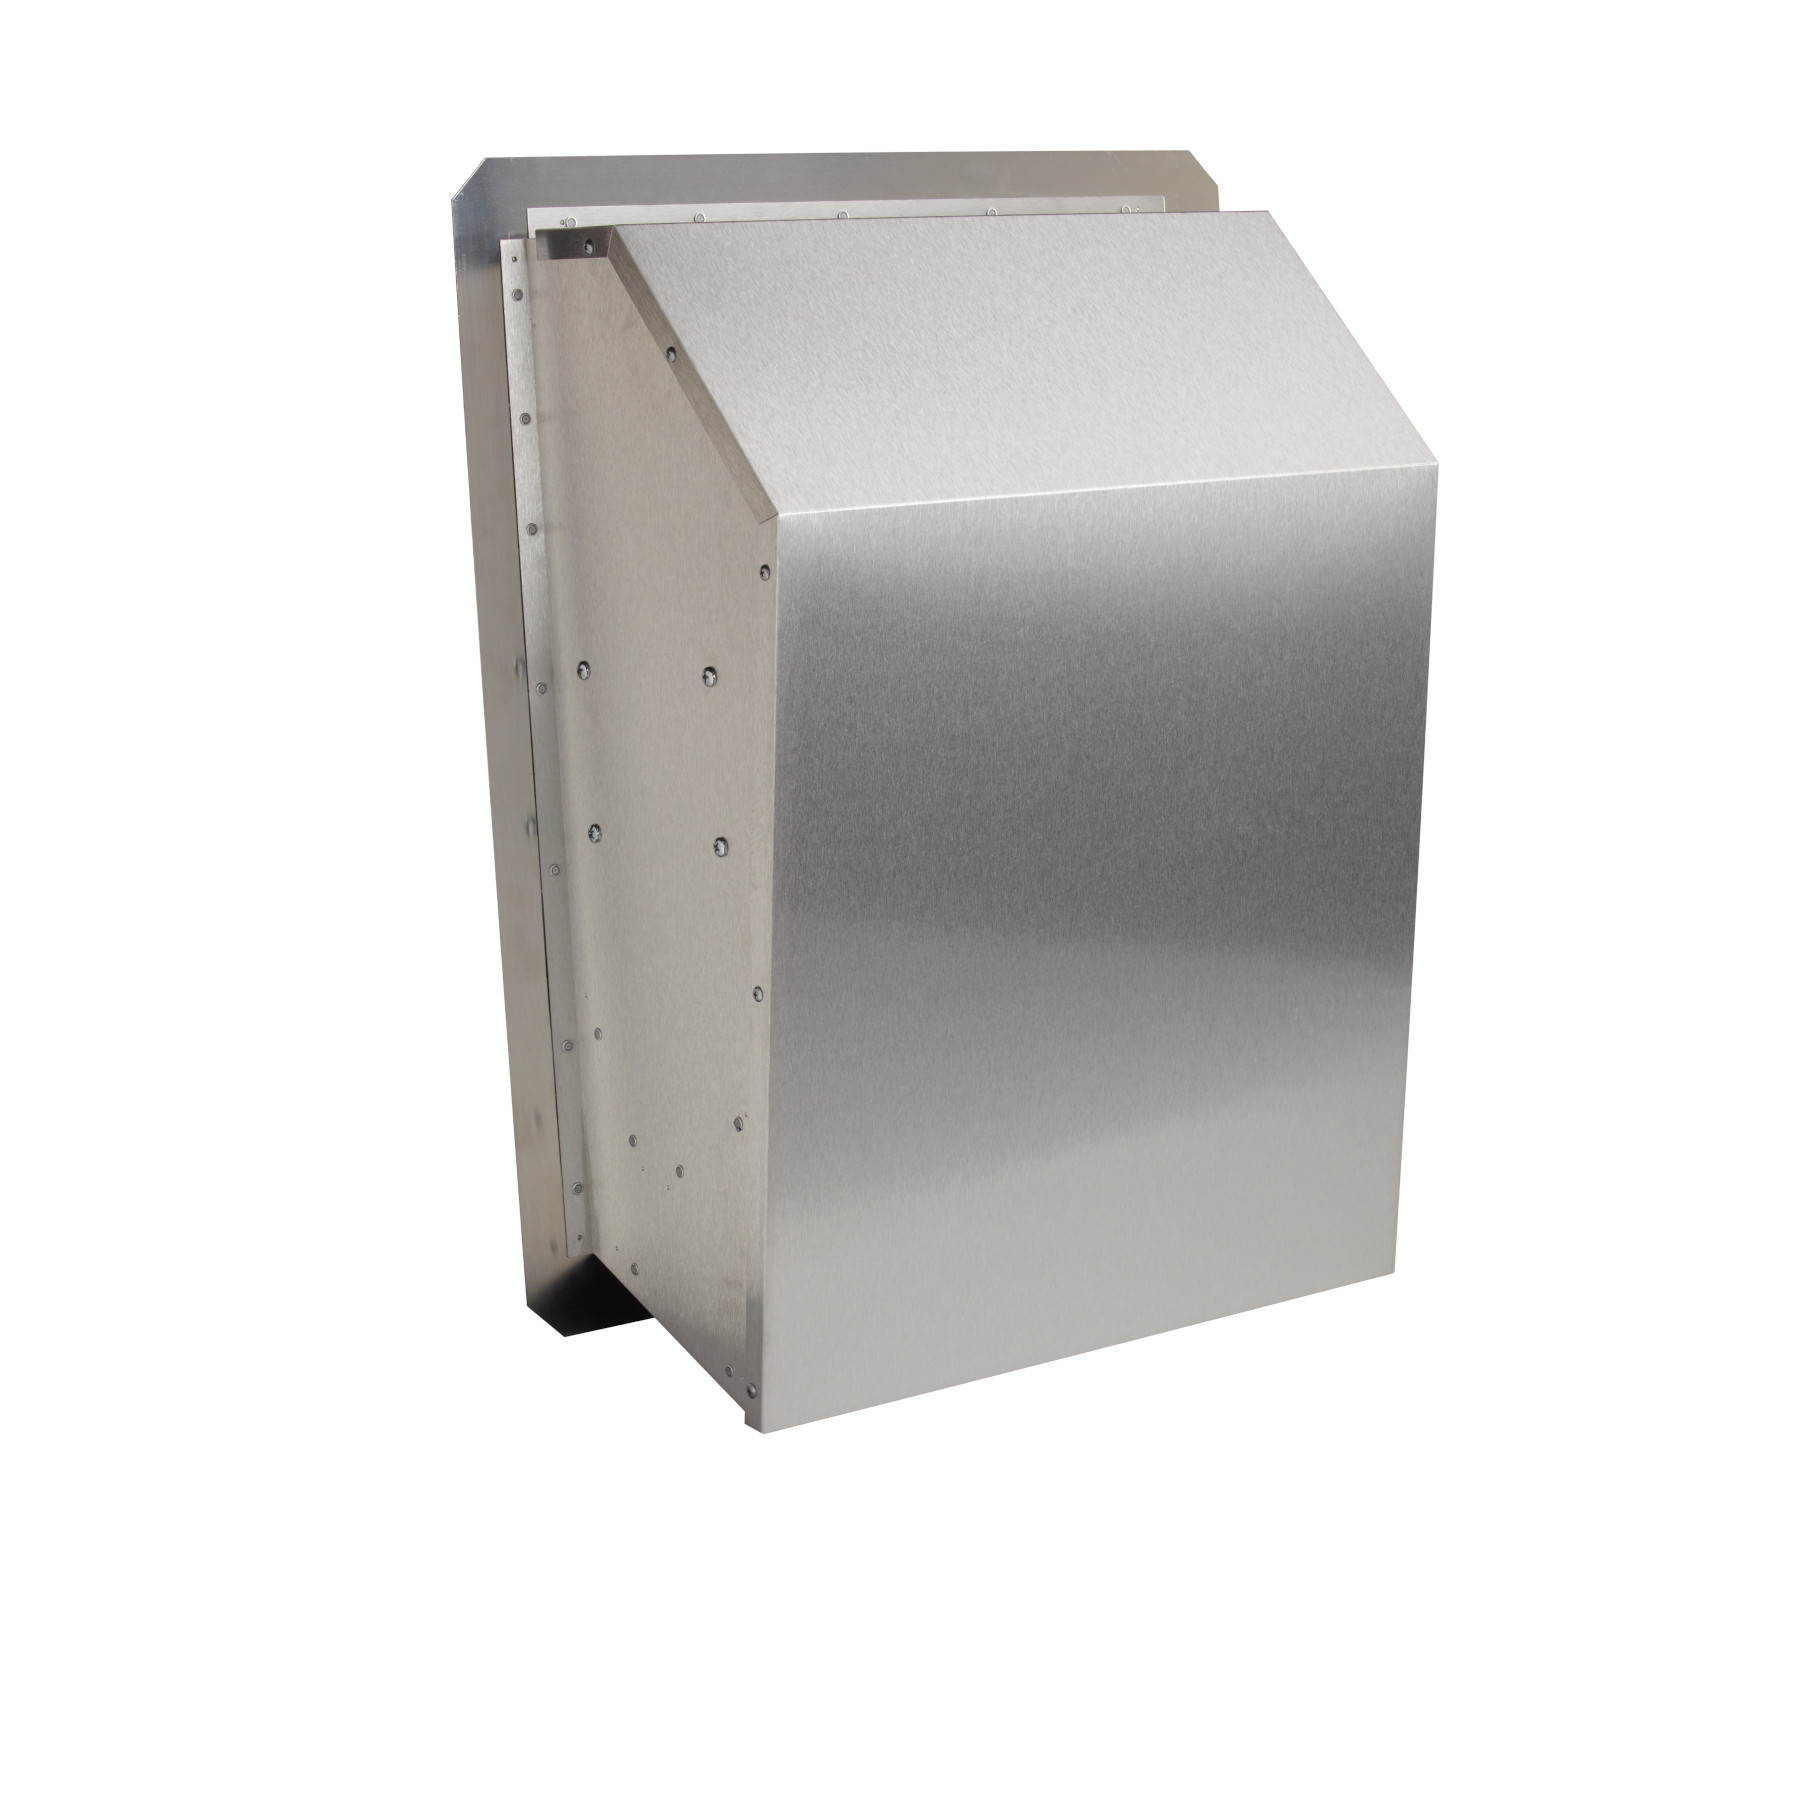 1620 Max External Blower CFM, for use with Select Broan® Range Hoods